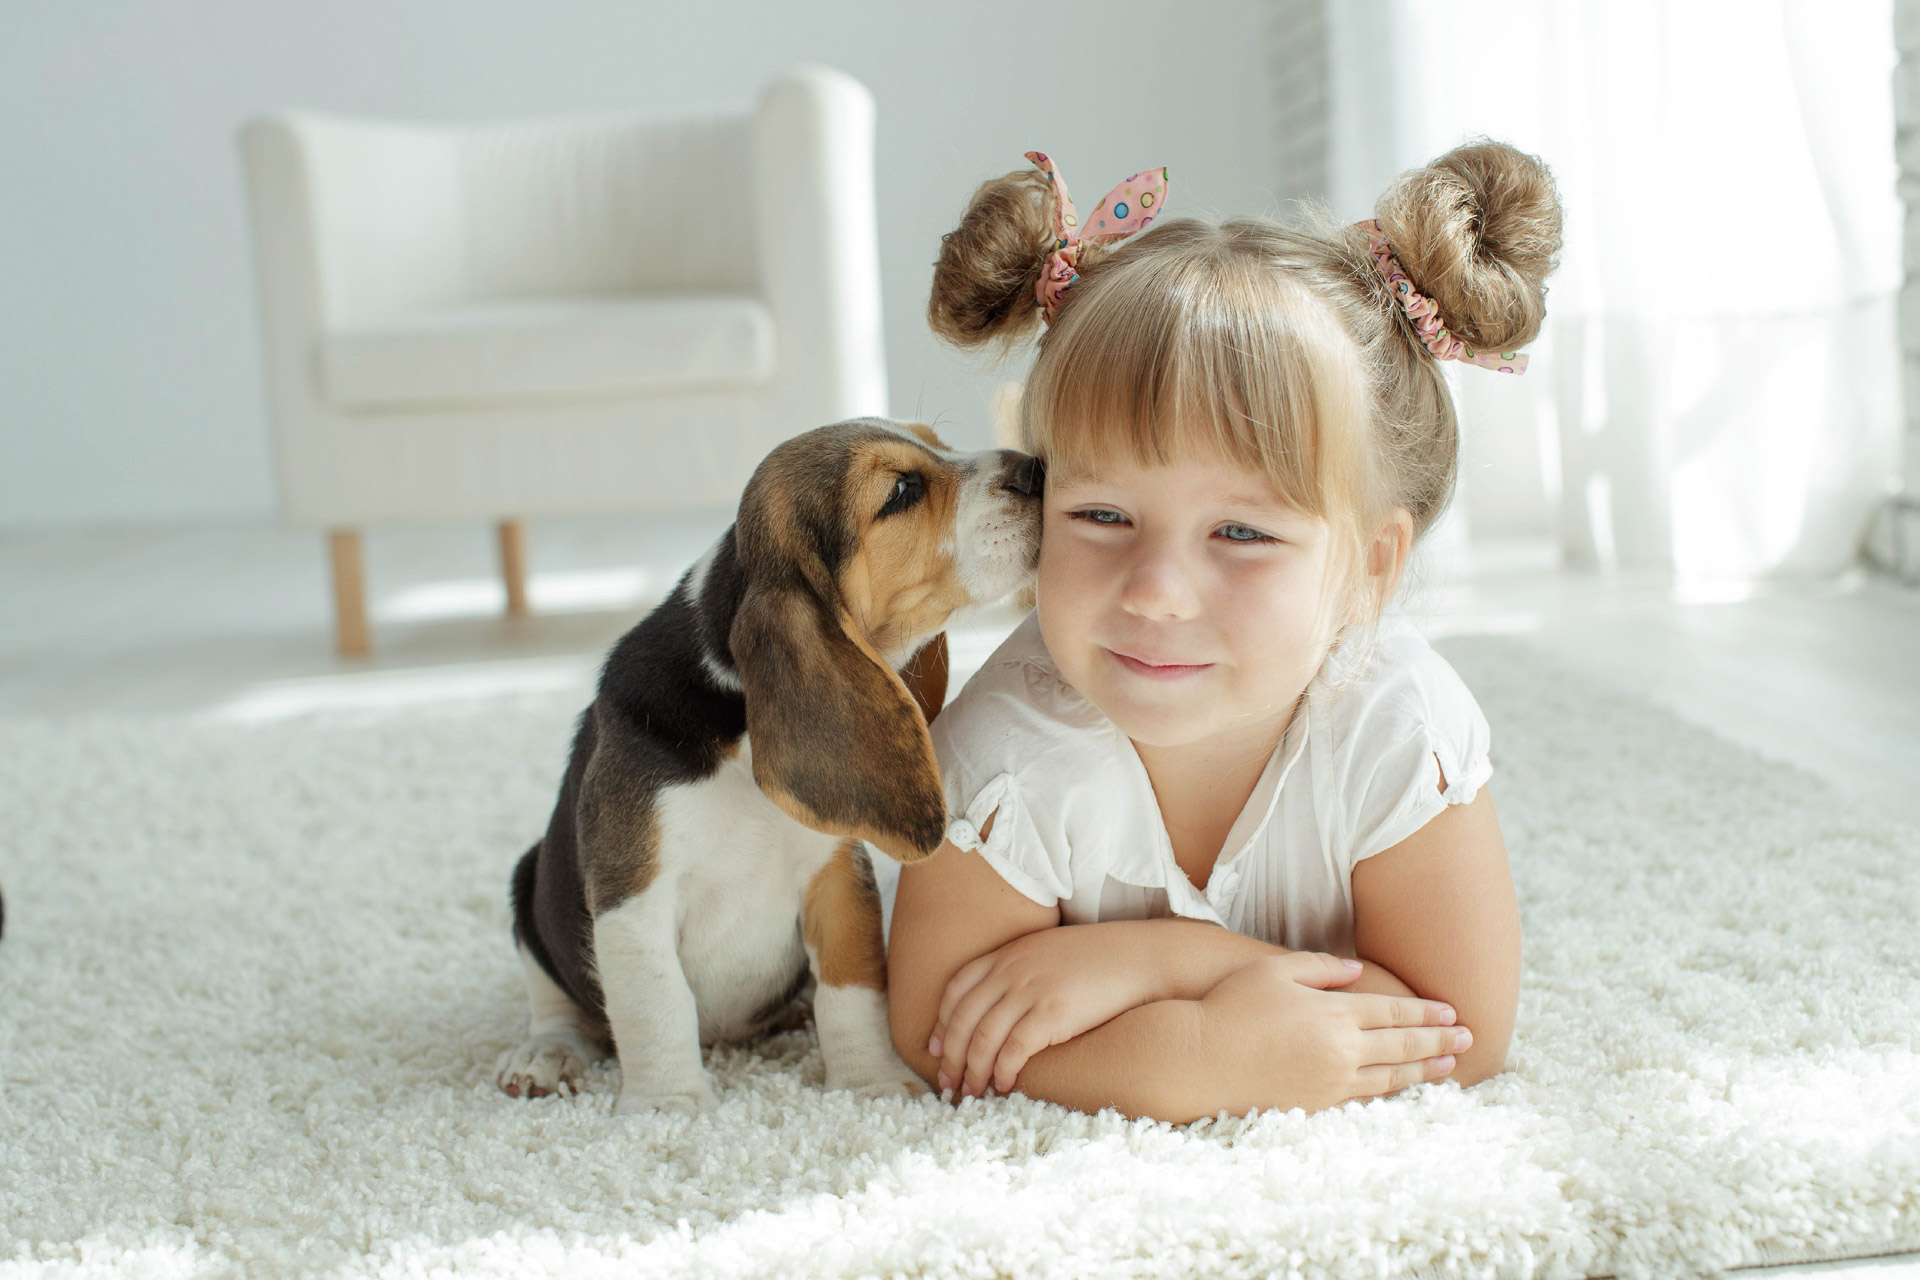 Girl on carpet with a puppy